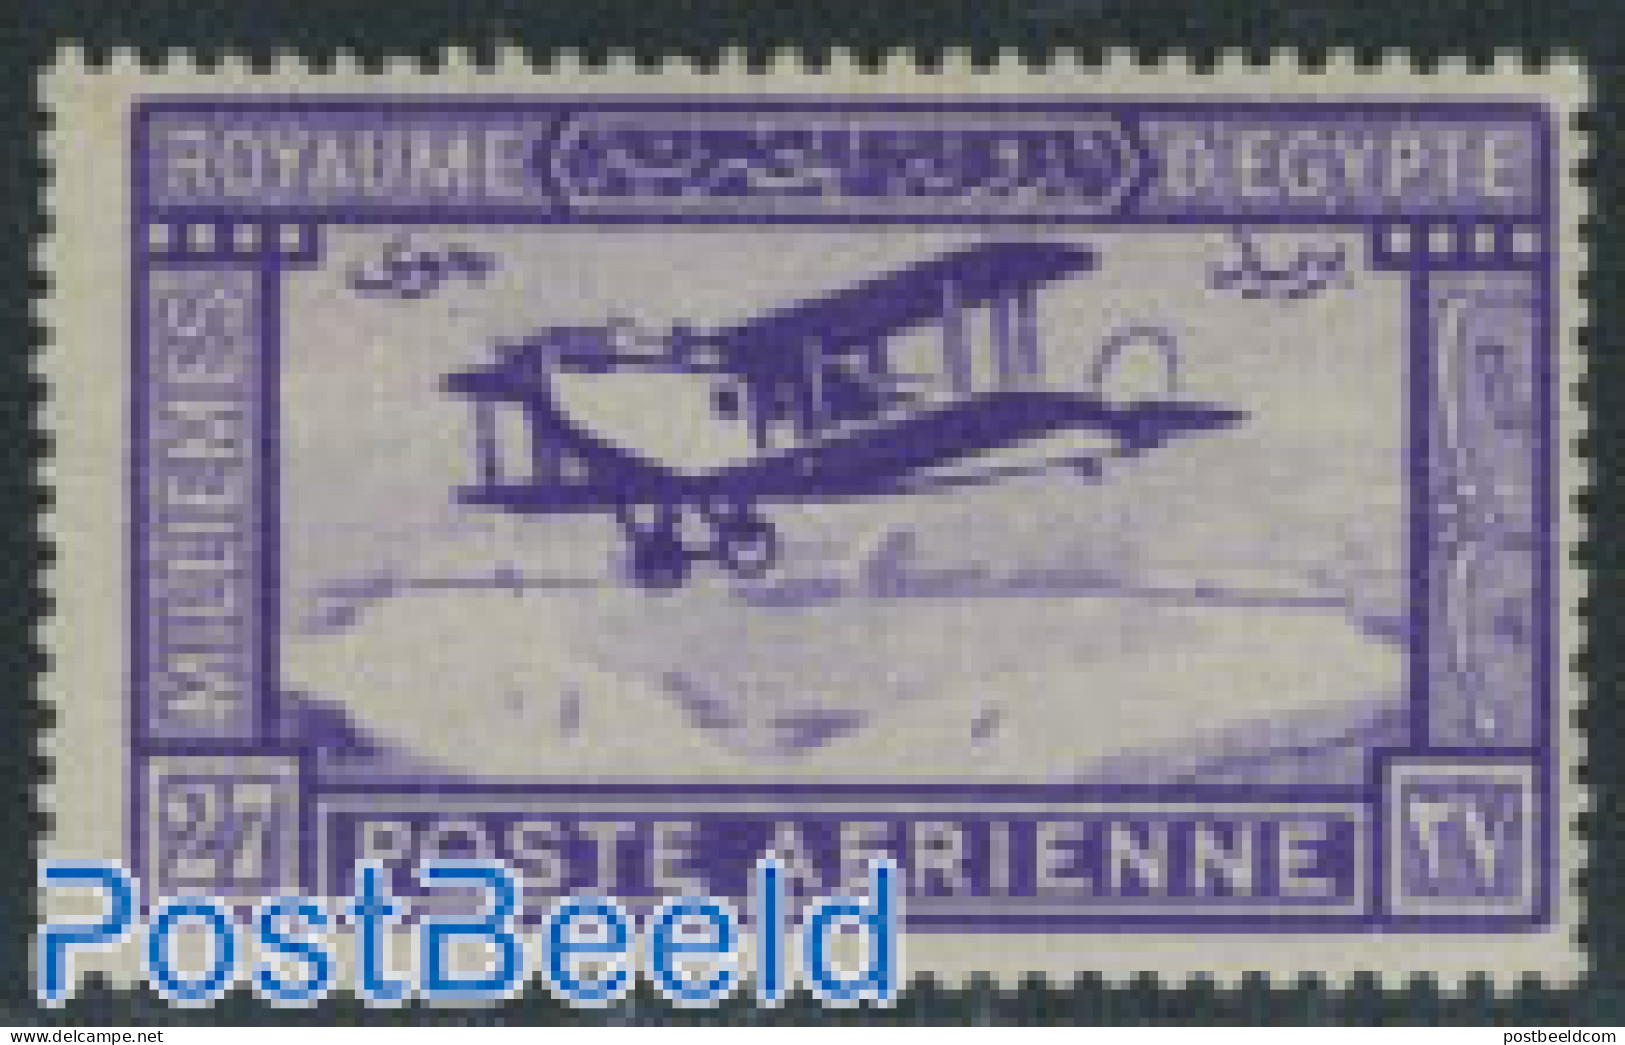 Egypt (Kingdom) 1926 Cairo-Bagdad Air Connection 1v, Unused (hinged), Transport - Aircraft & Aviation - Unused Stamps